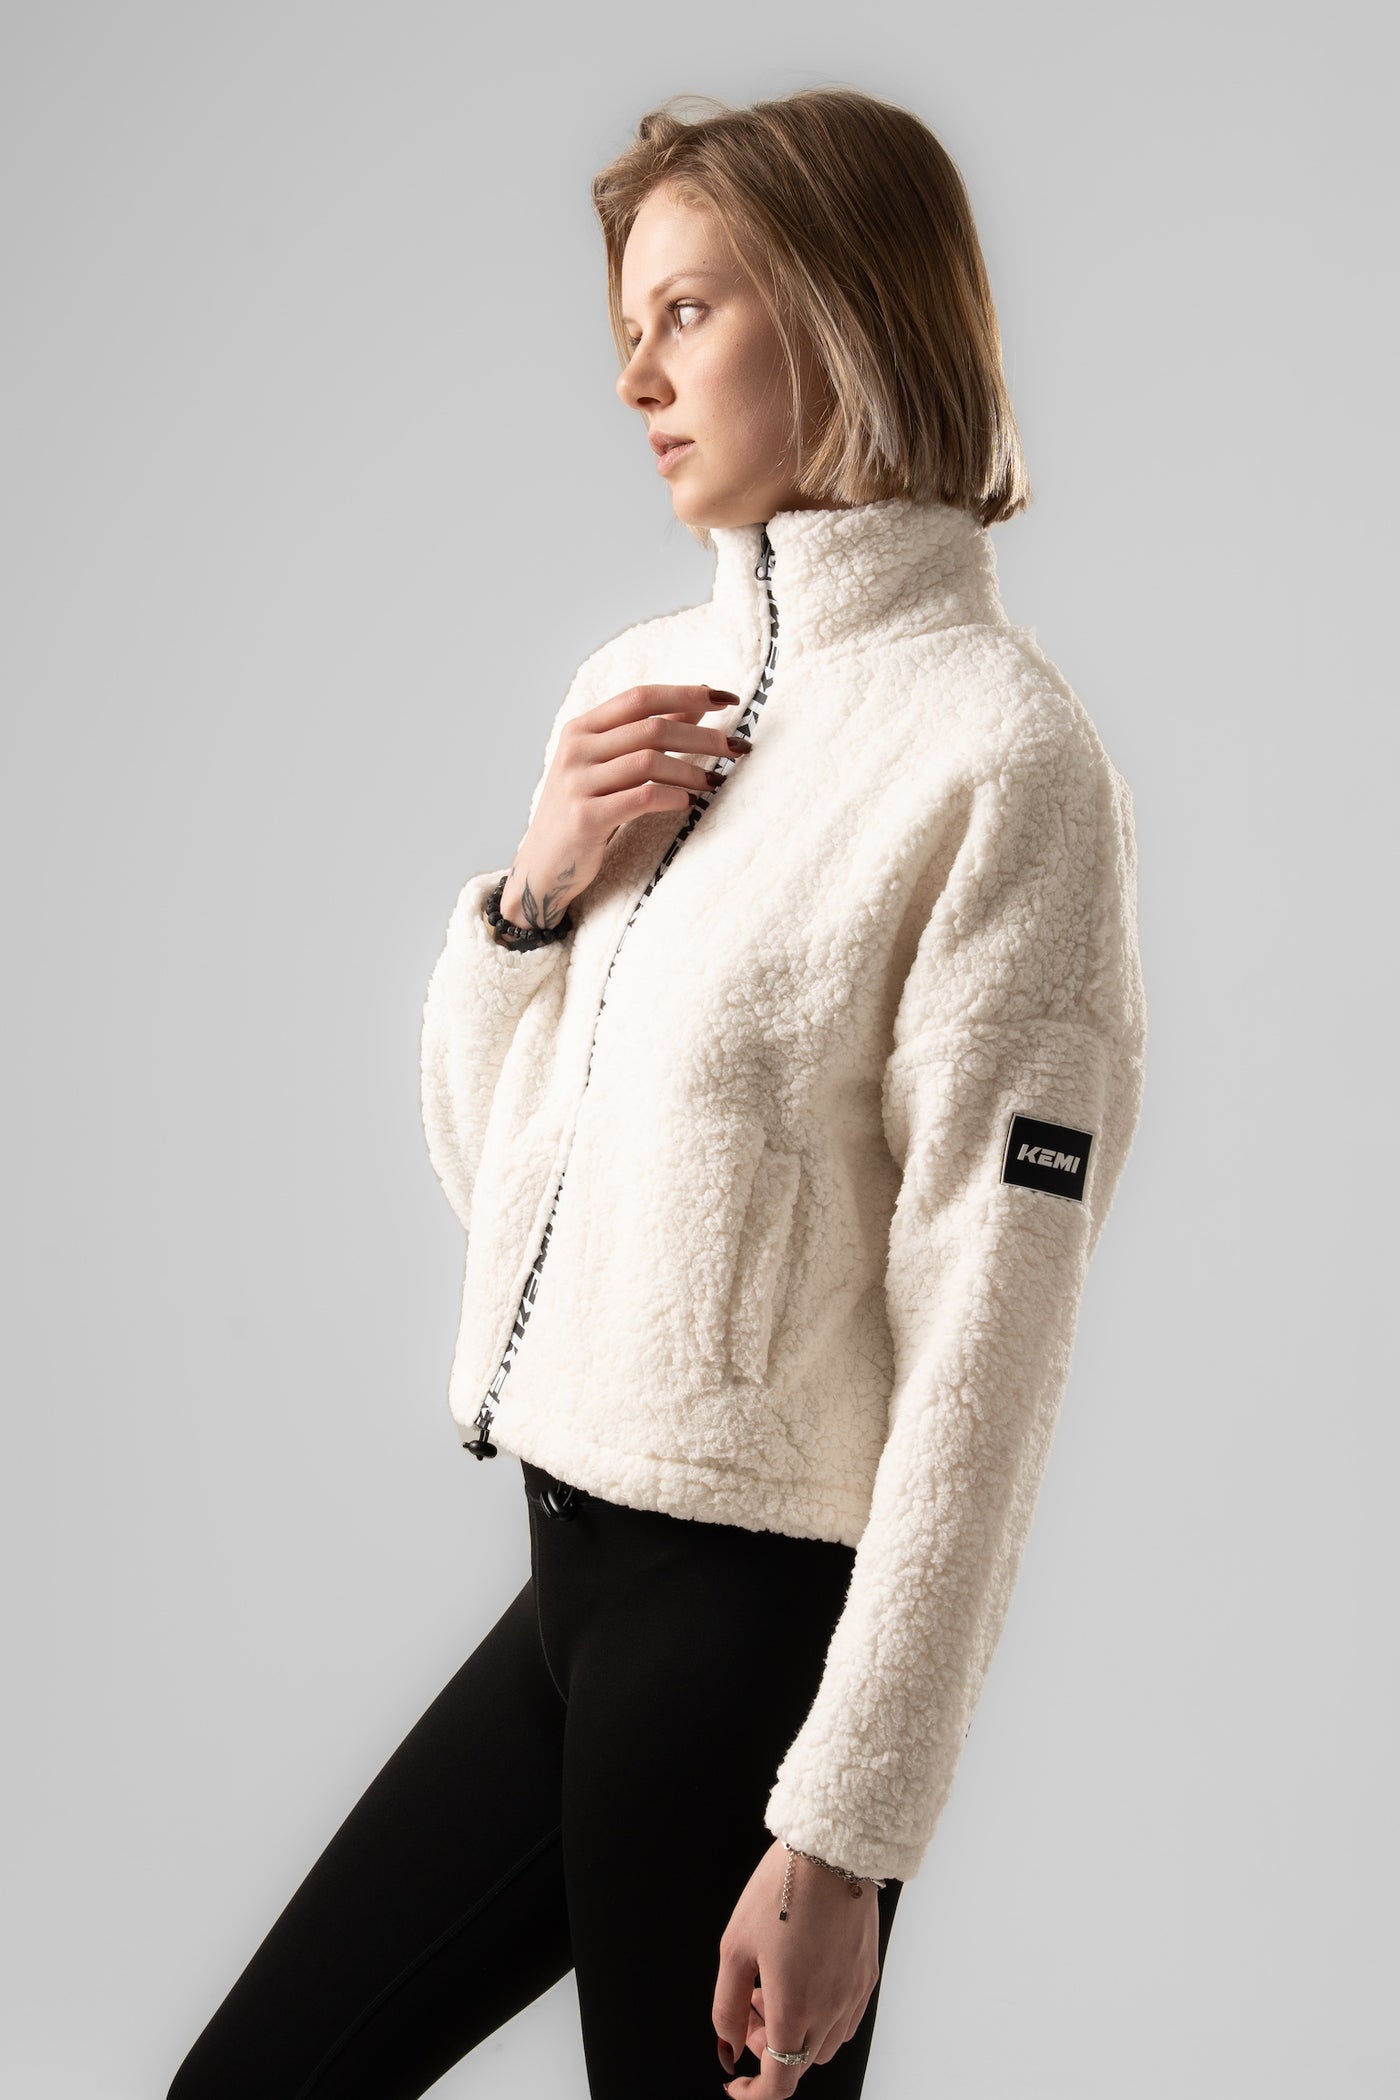 TOPSPIN SHERPA JACKET IN WHITE